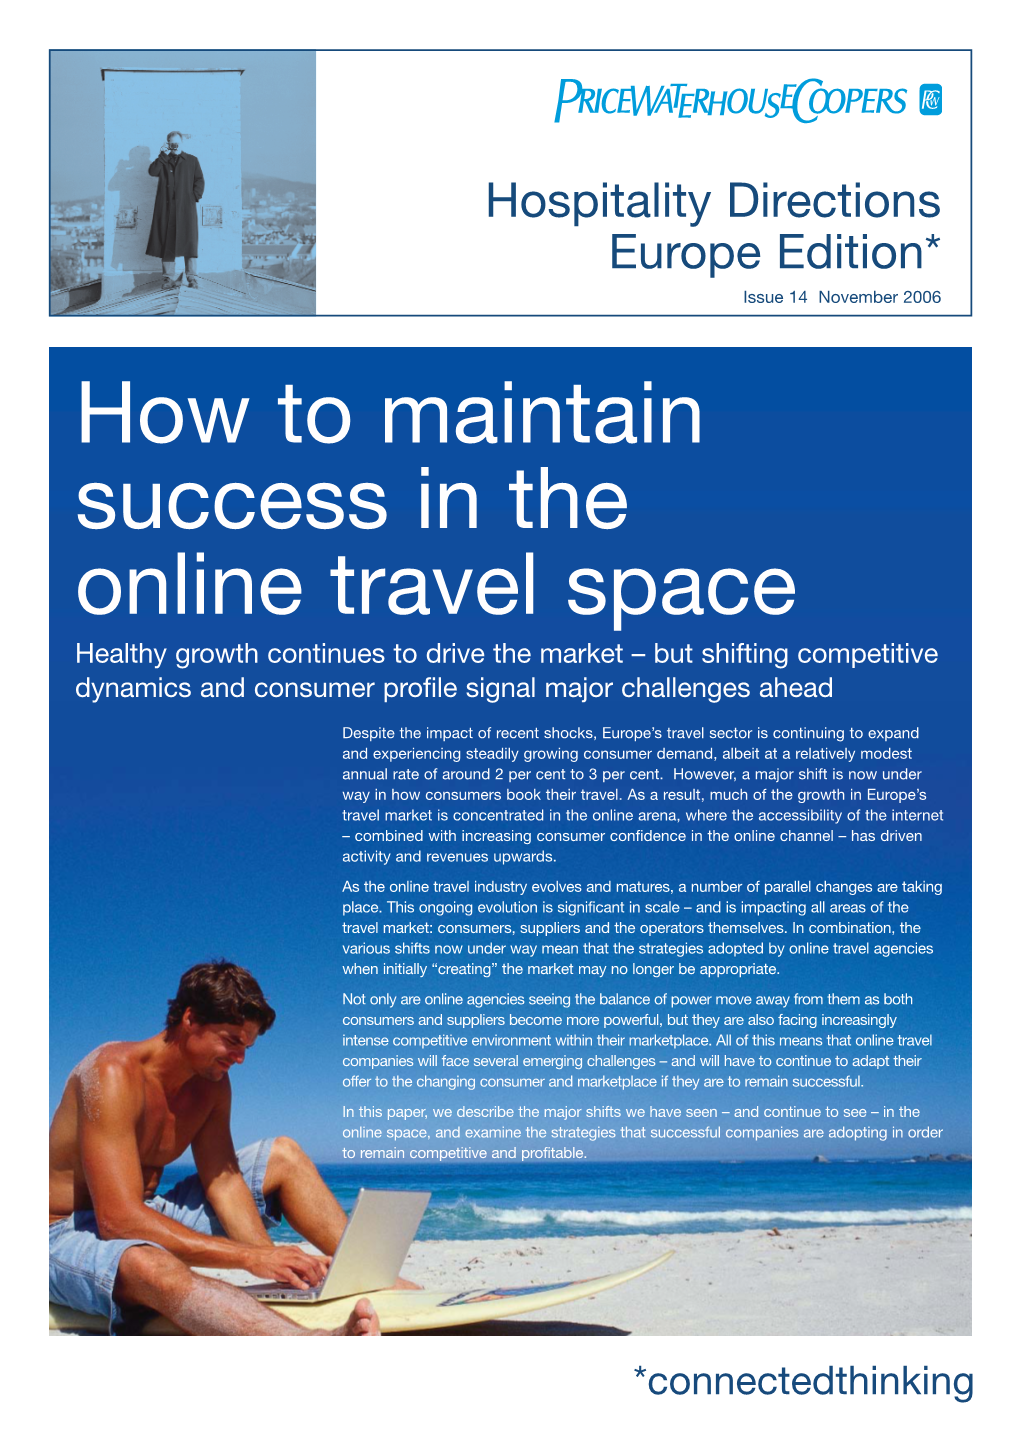 Online Travel Space Healthy Growth Continues to Drive the Market – but Shifting Competitive Dynamics and Consumer Profile Signal Major Challenges Ahead